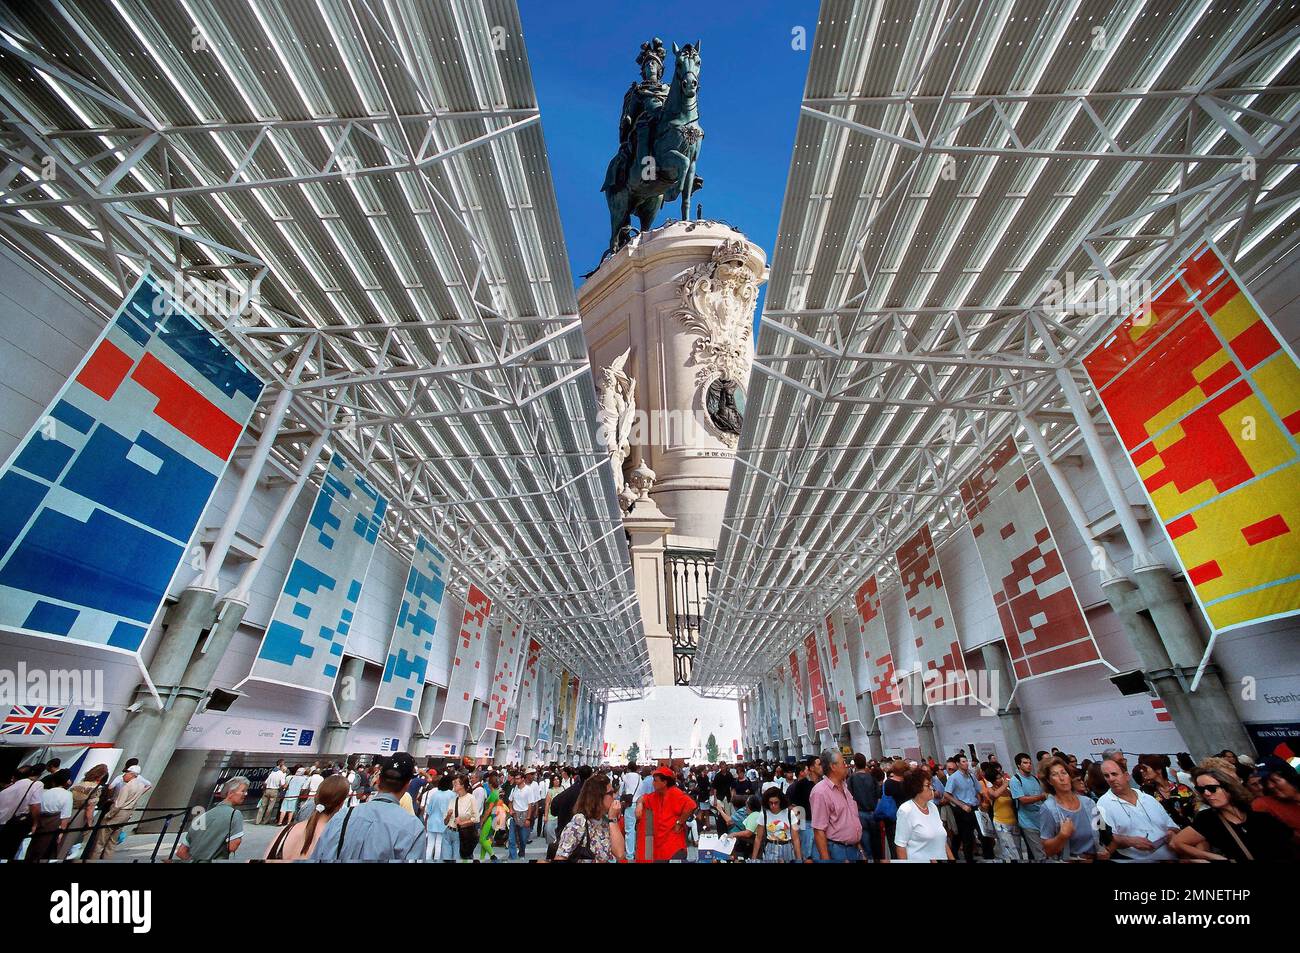 Photomontage equestrian statue of King Jose I, tourists at Expo 98, Lisbon, Portugal Stock Photo